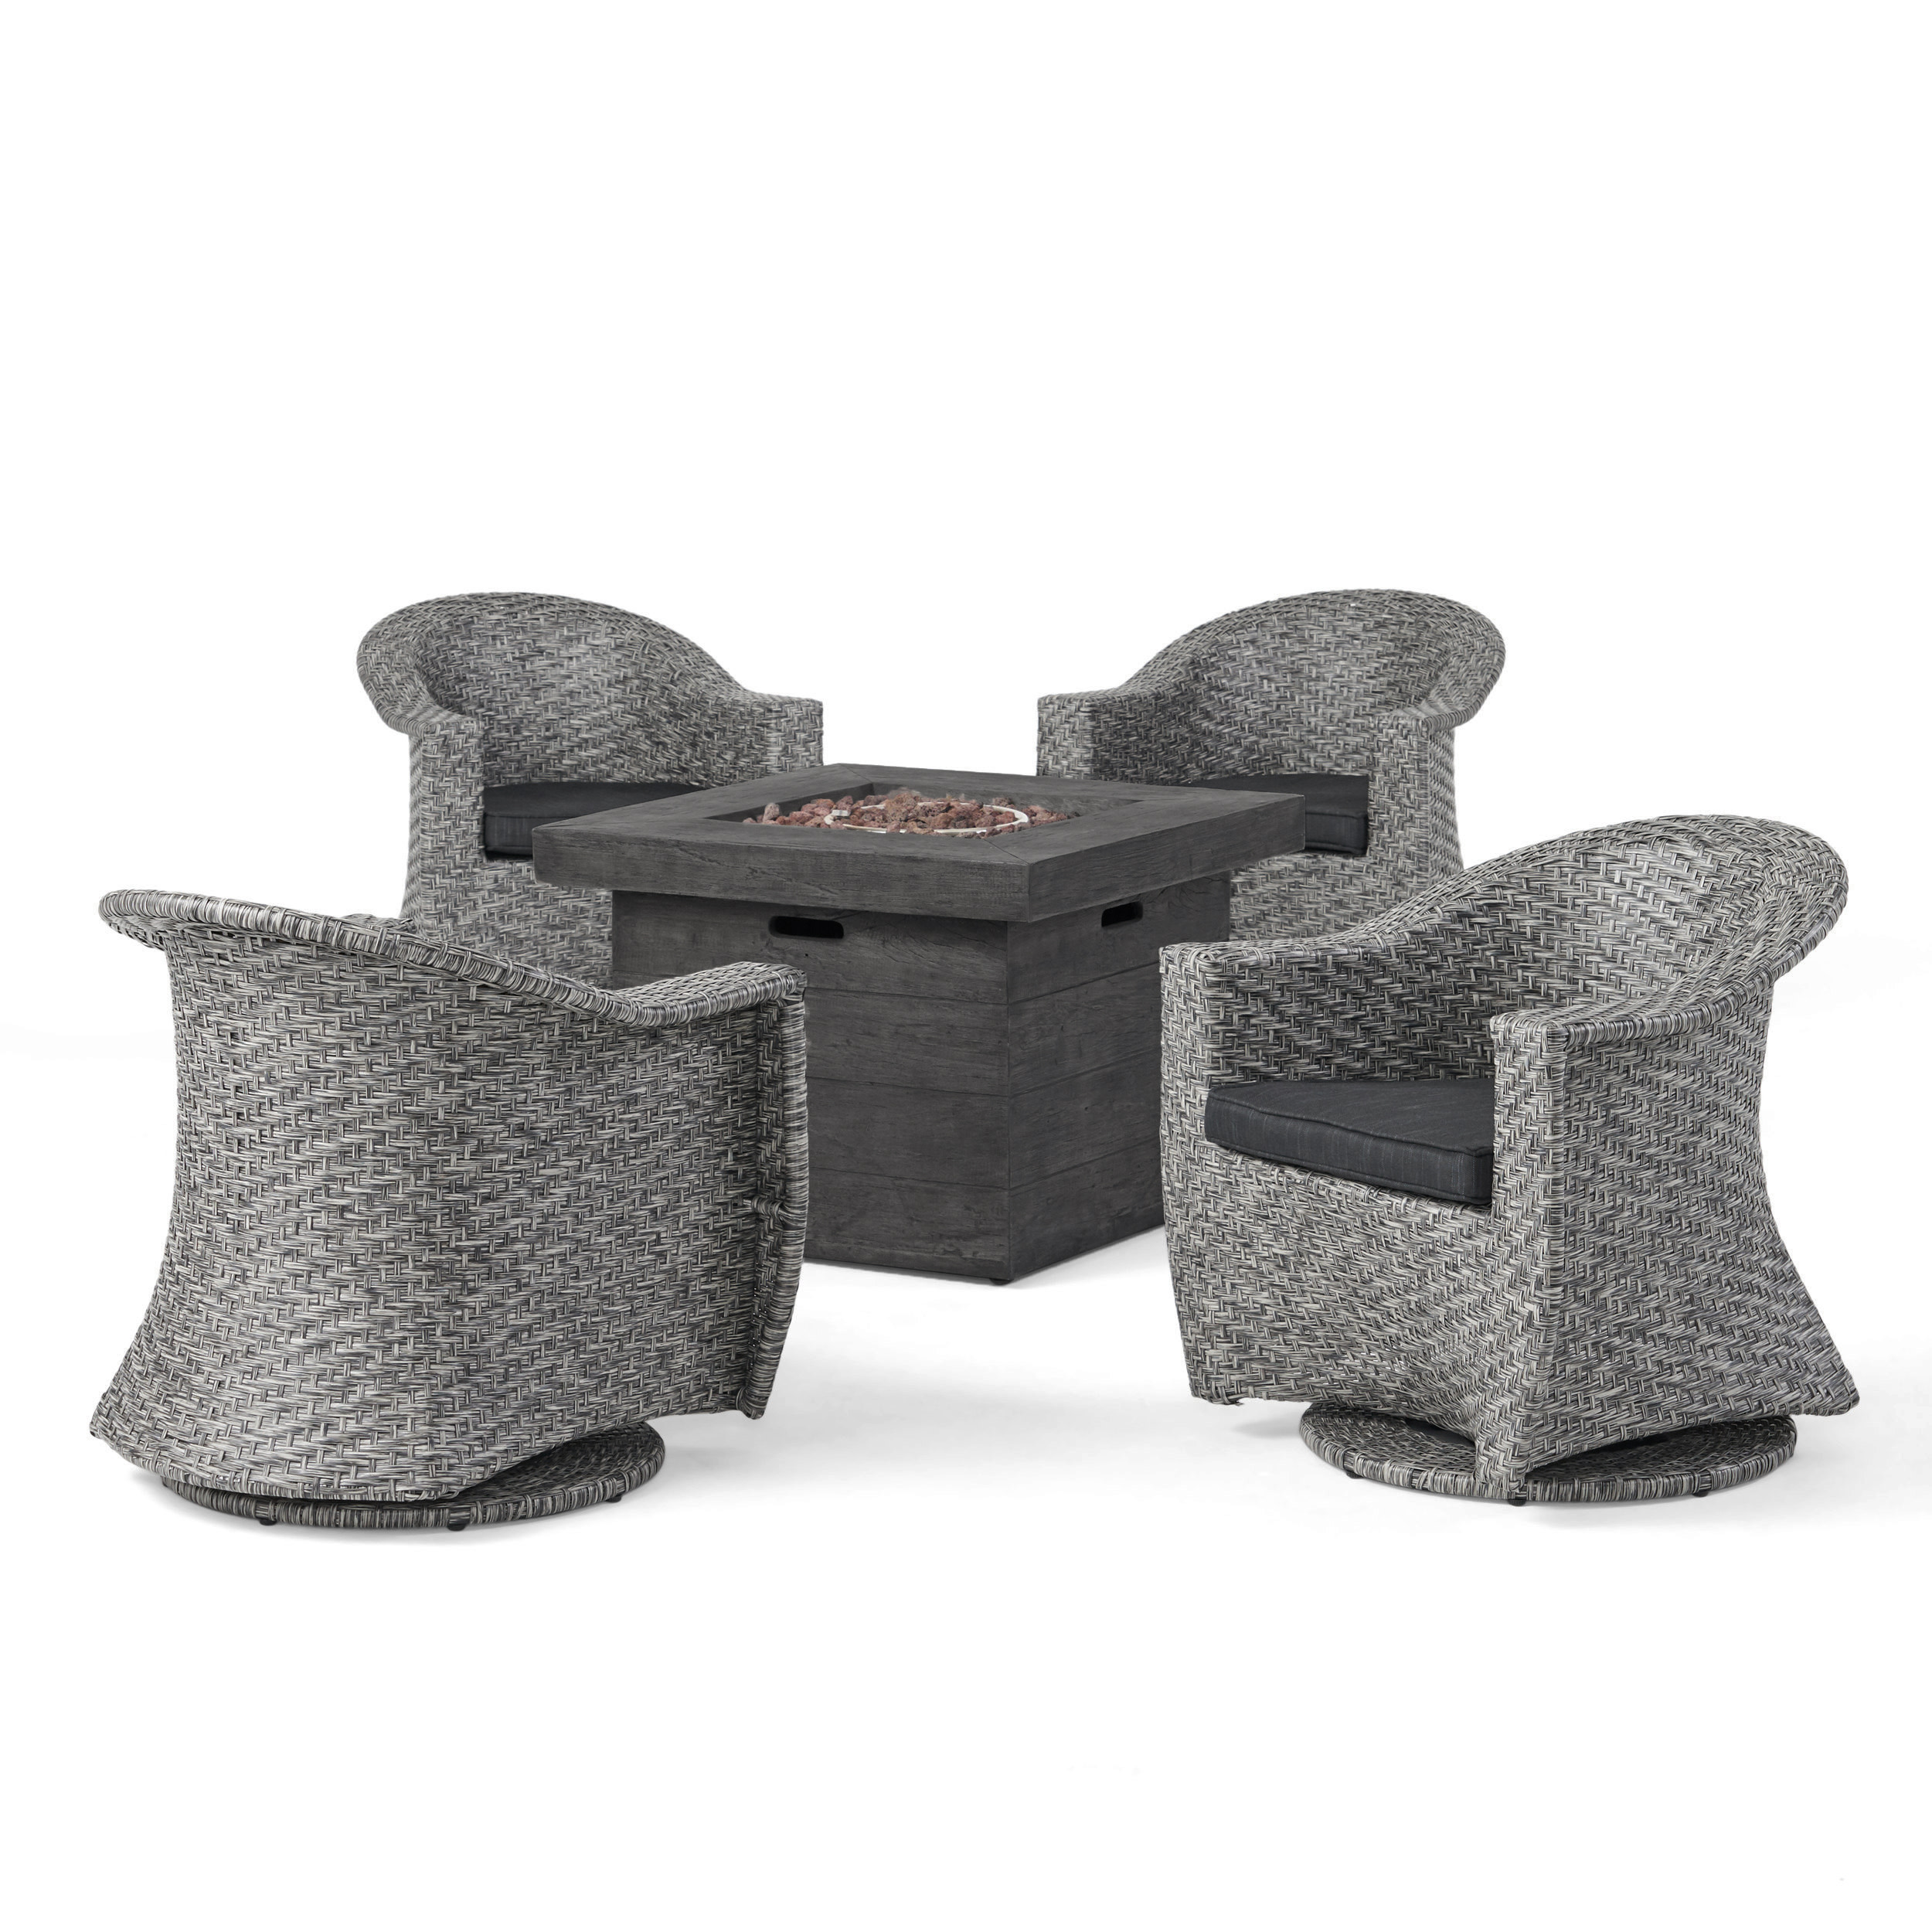 GDF Studio Amata Outdoor Wicker 5 Piece Swivel Club Chair and Fire Pit Set, Mixed Black, Dark Gray, and Gray - image 1 of 13